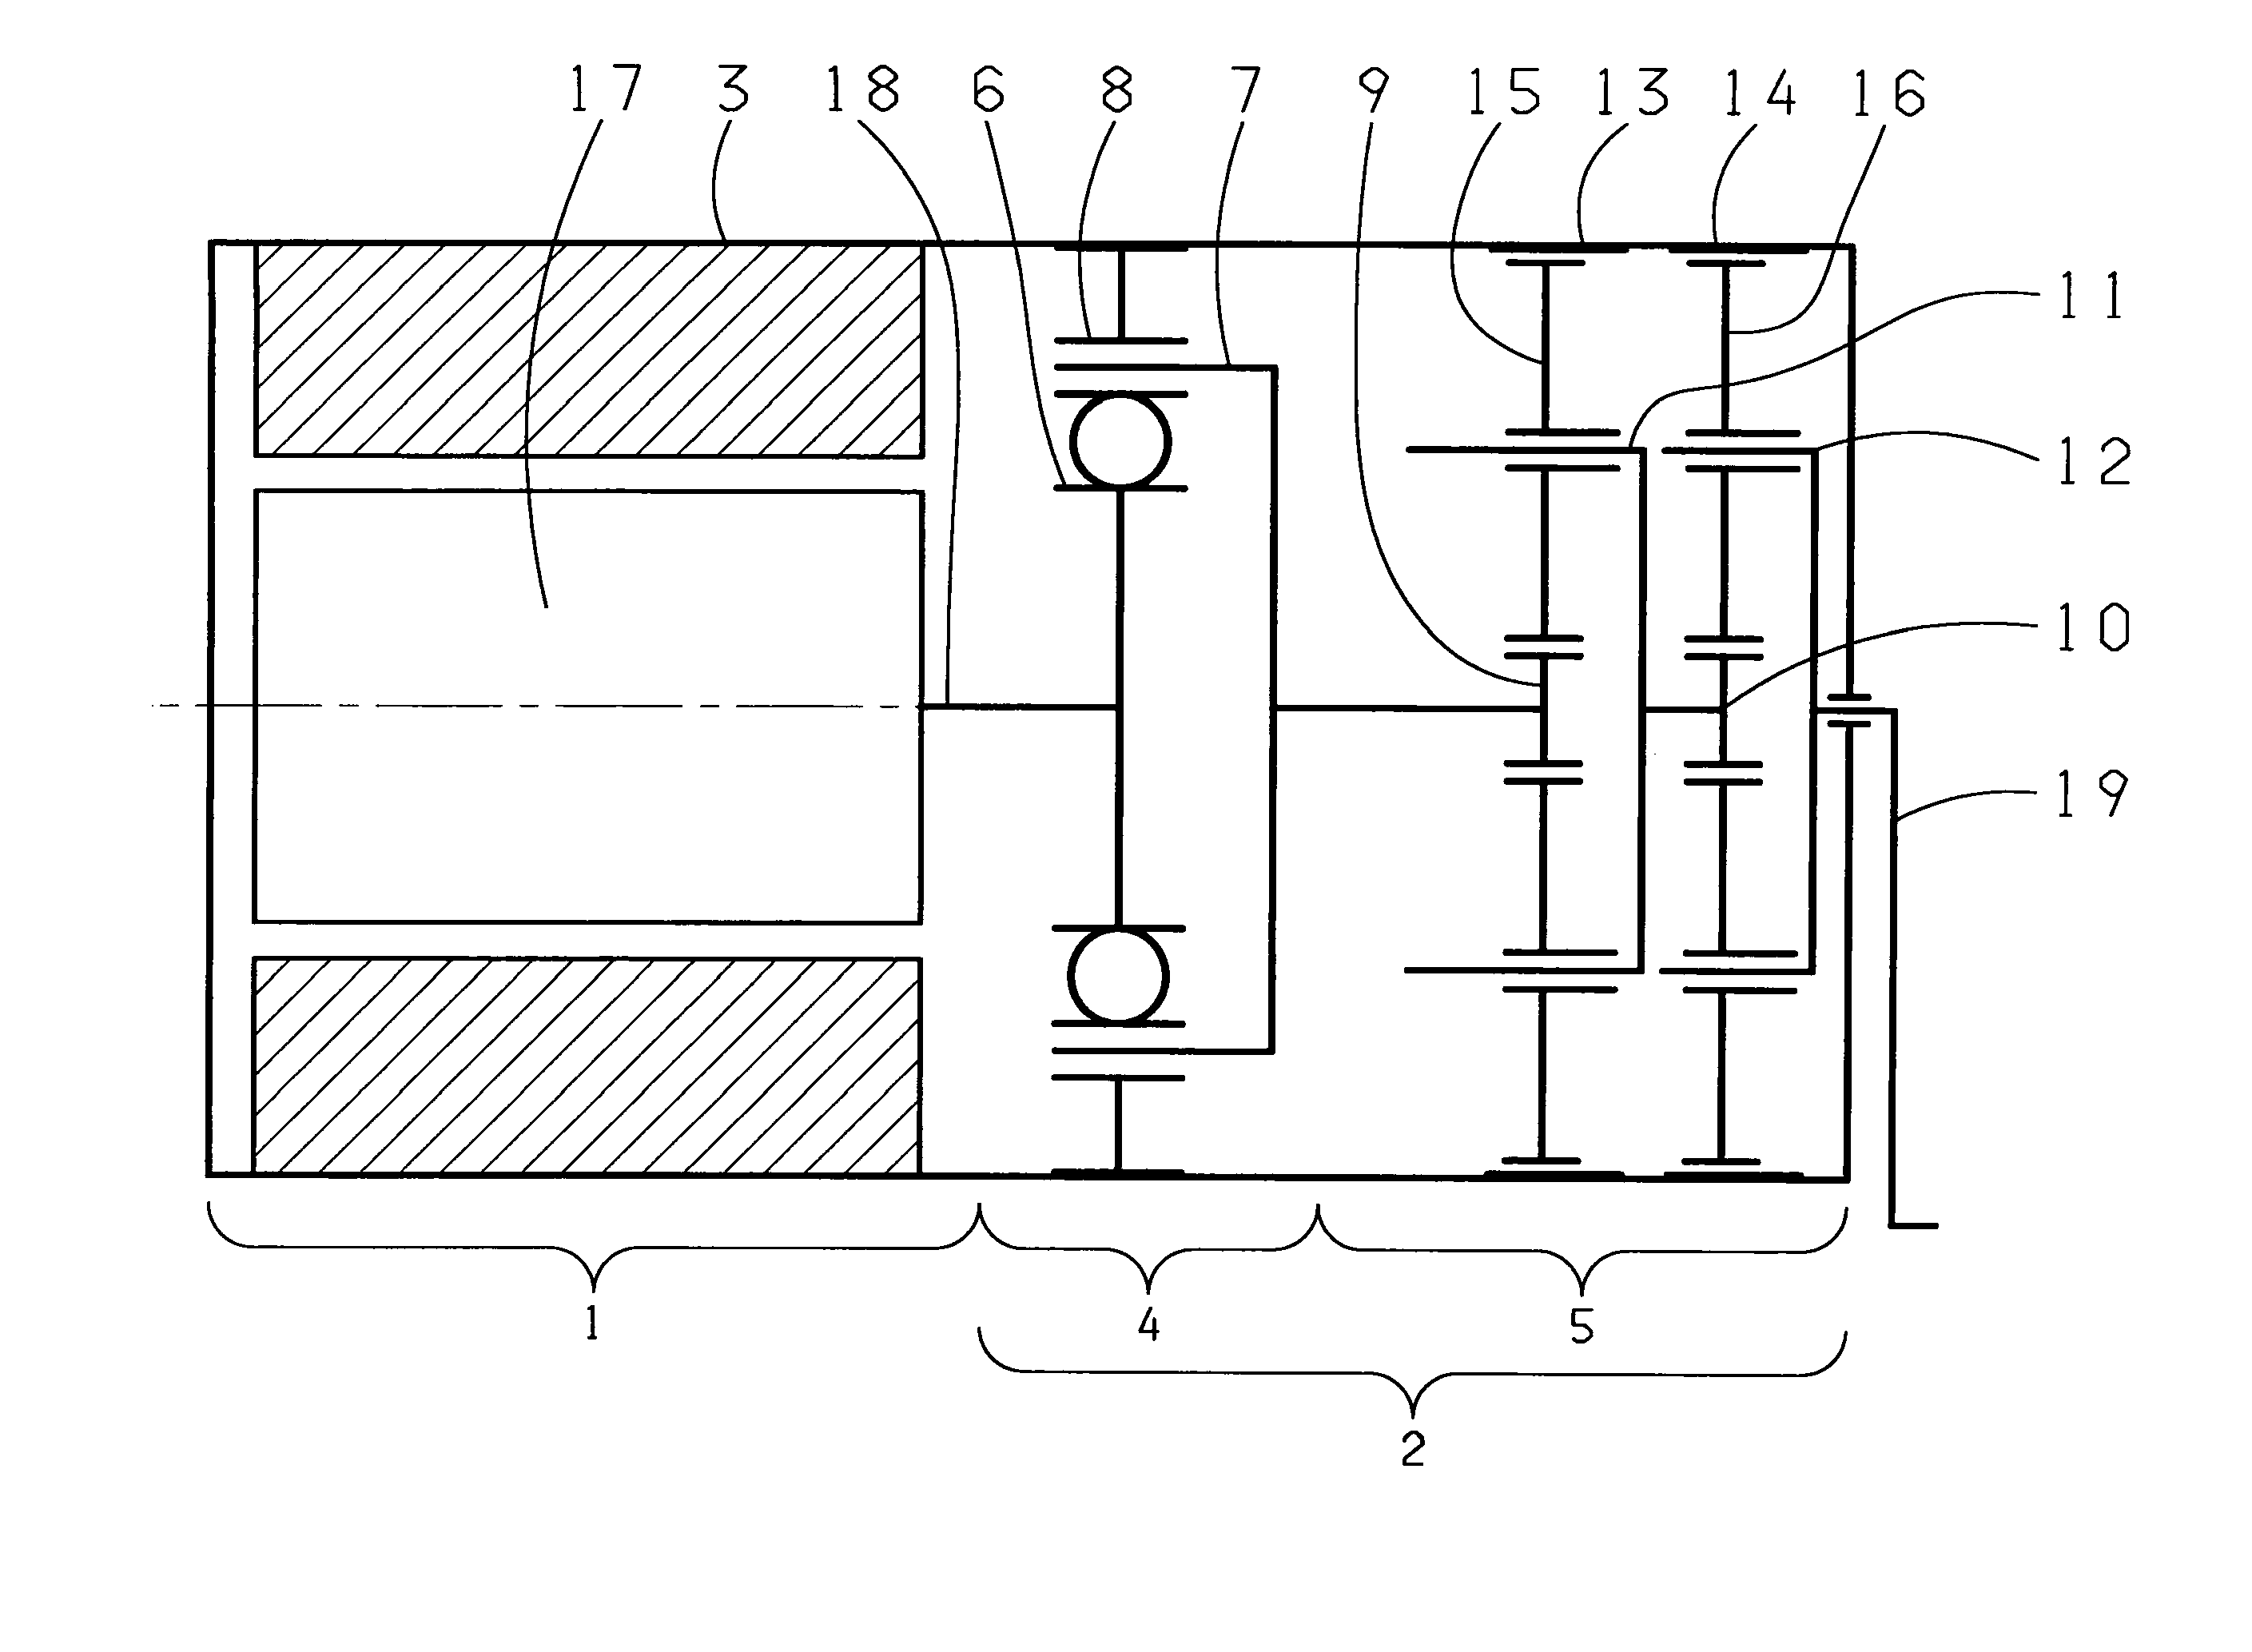 Actuator for generating a rotational positioning movement